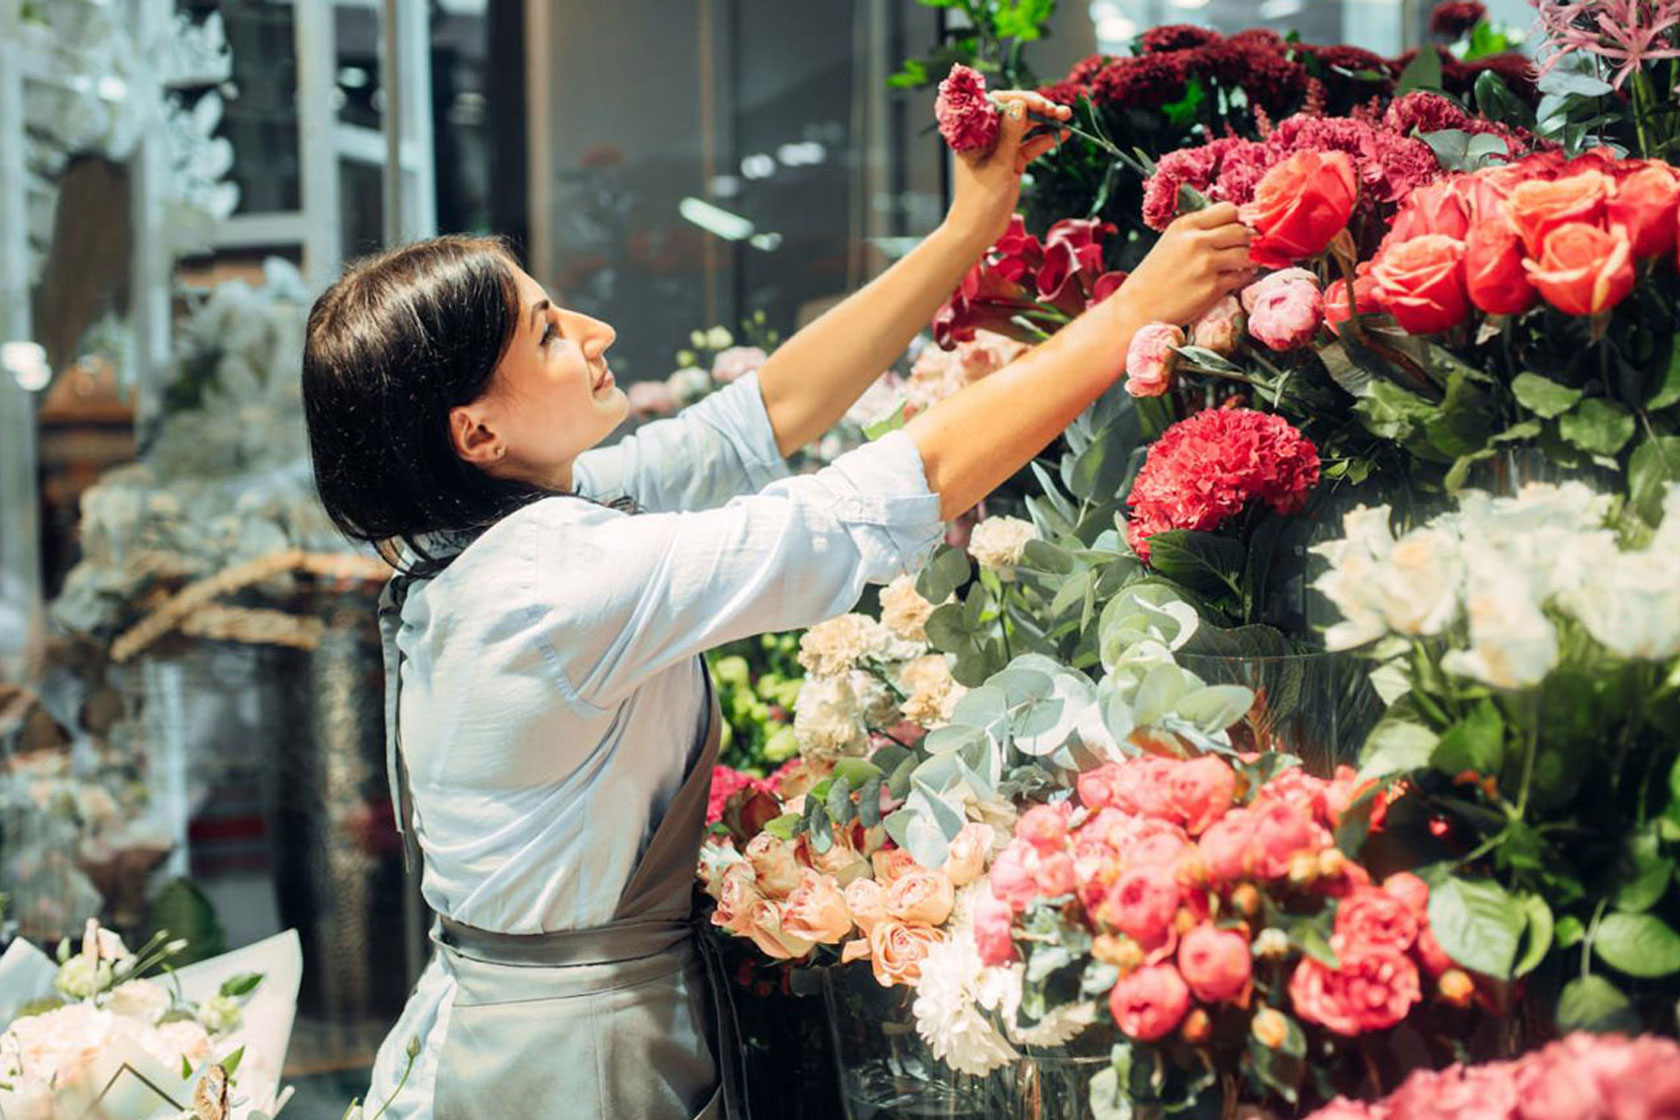 Allow our expert florists to create a beautiful seasonal bouquet for you using the freshest blooms direct from our growers